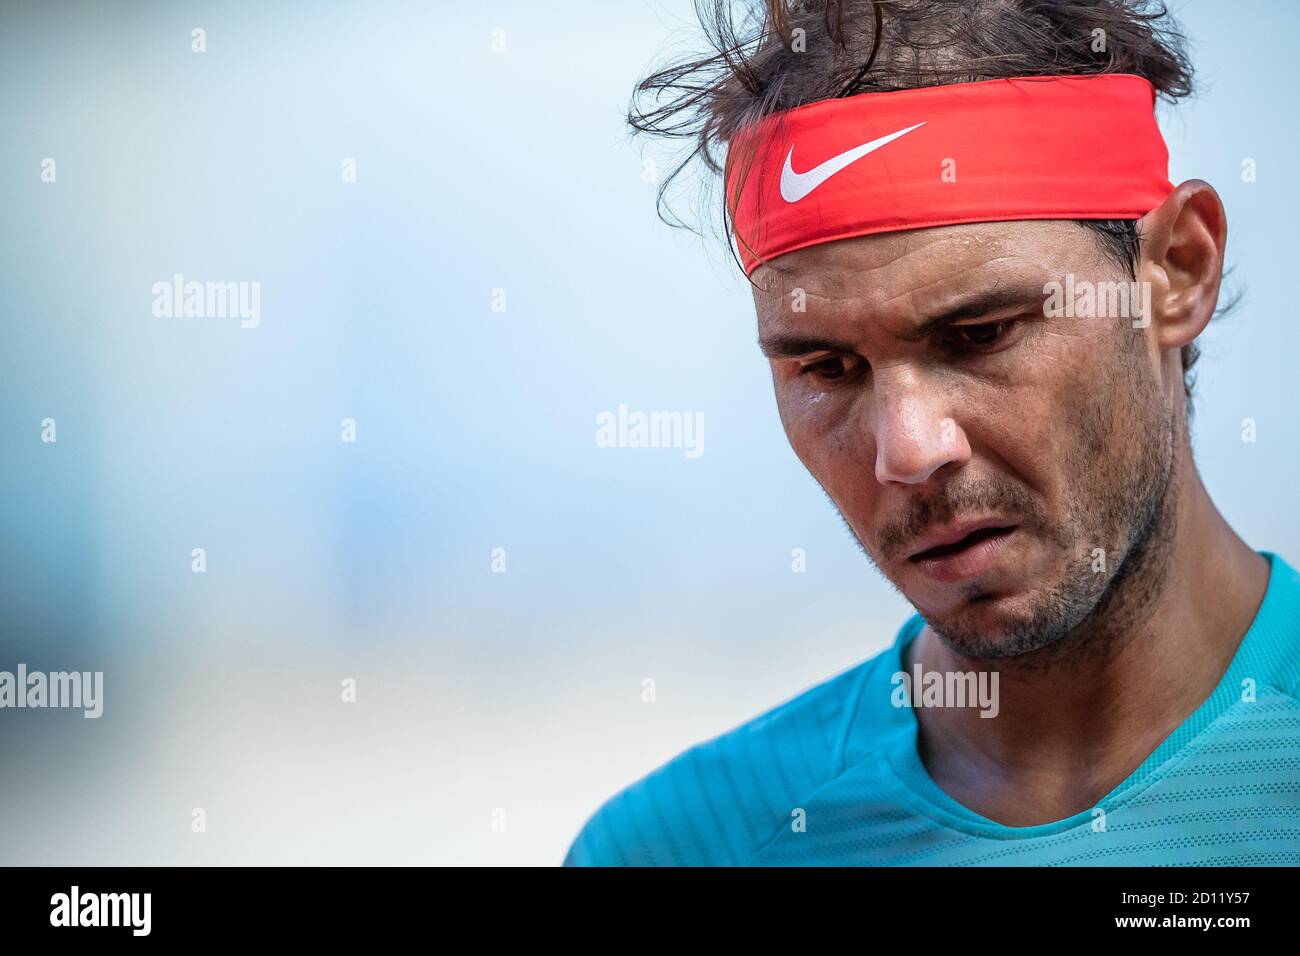 Paris, France. 4th Oct, 2020. Rafael Nadal reacts during the men's singles 4th round match between Rafael Nadal of Spain and Sebastian Korda of the United States at the French Open tennis tournament 2020 at Roland Garros in Paris, France, Oct. 4, 2020. Credit: Aurelien Morissard/Xinhua/Alamy Live News Stock Photo